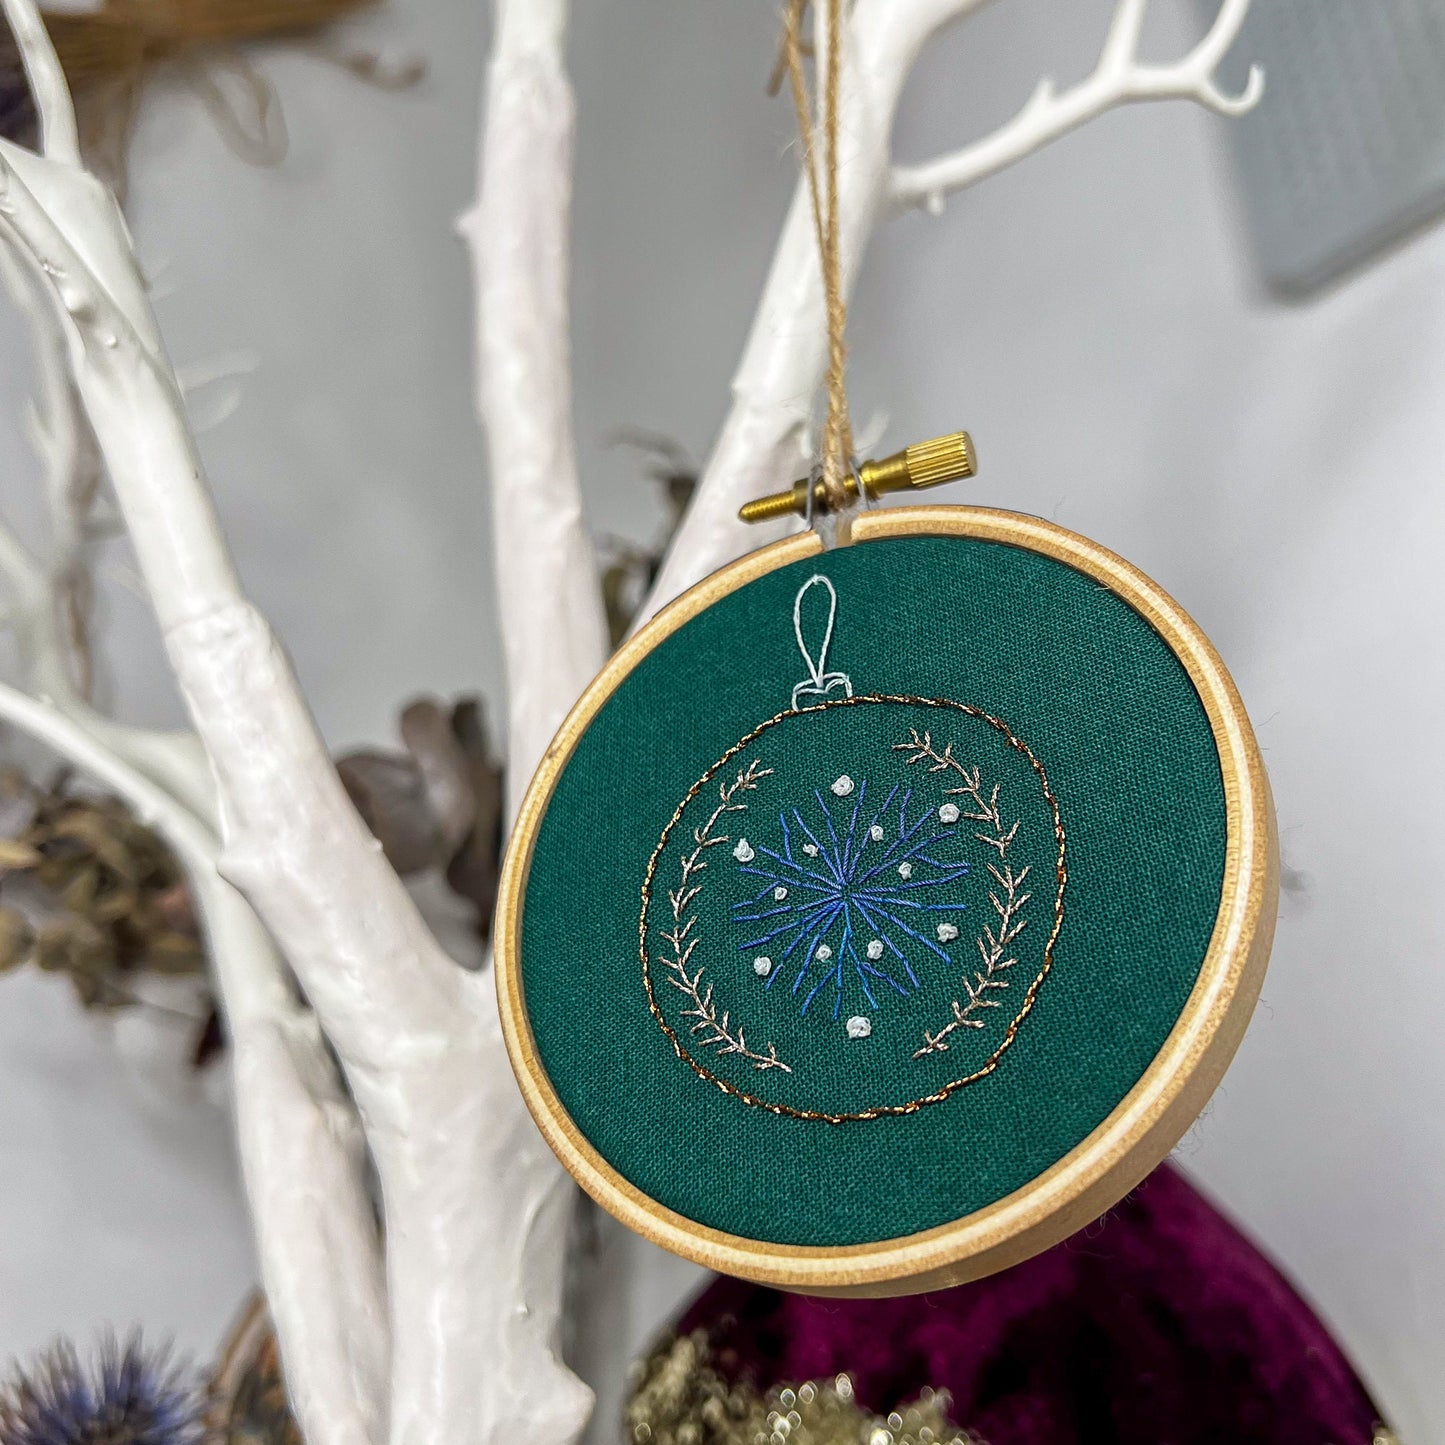 Christmas bauble embroidered hoop